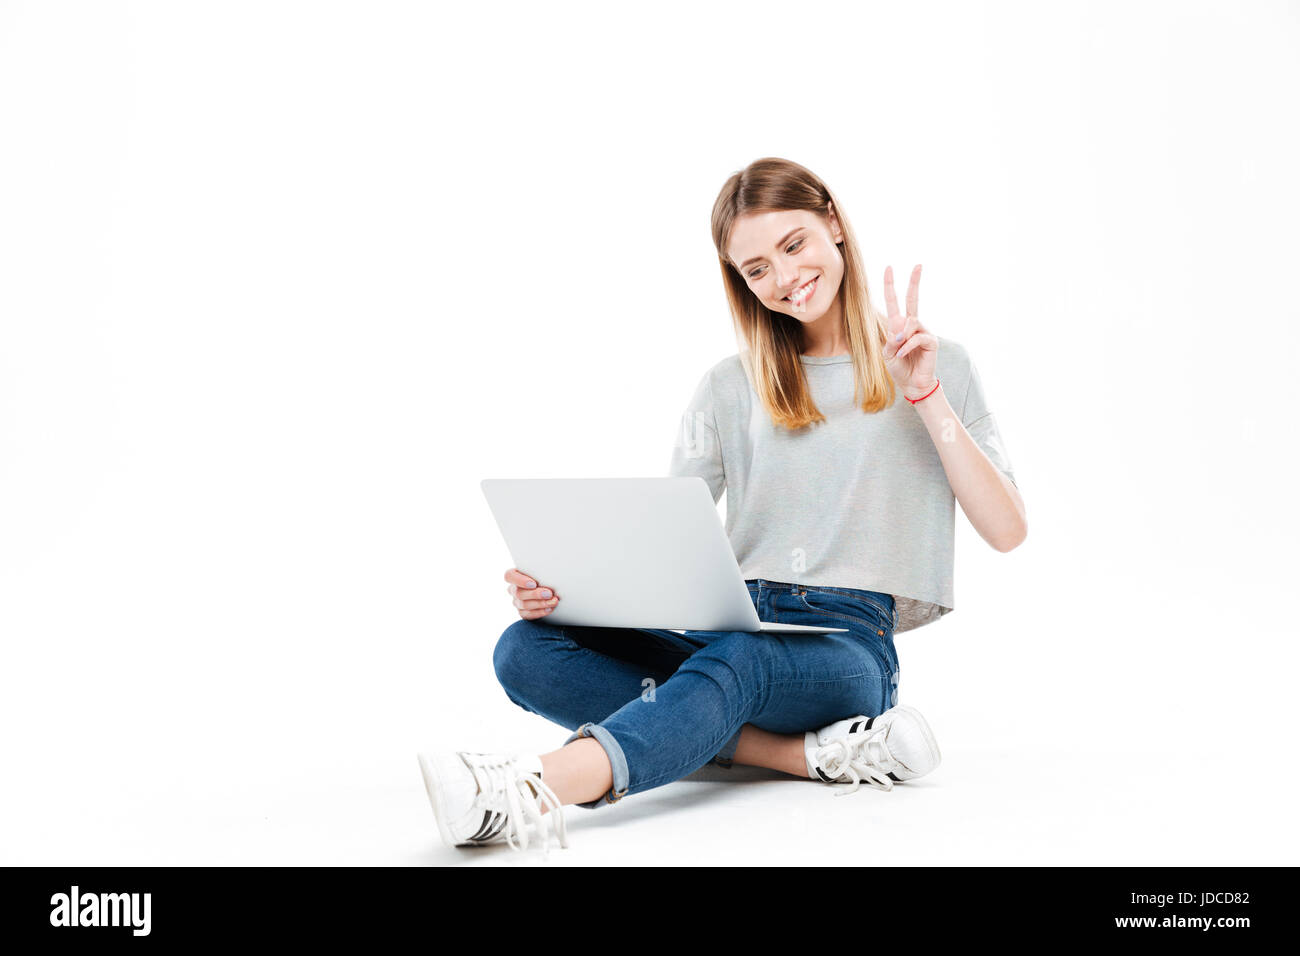 Young smiling woman using laptop computer and shoing peace gesture isolated over white Stock Photo